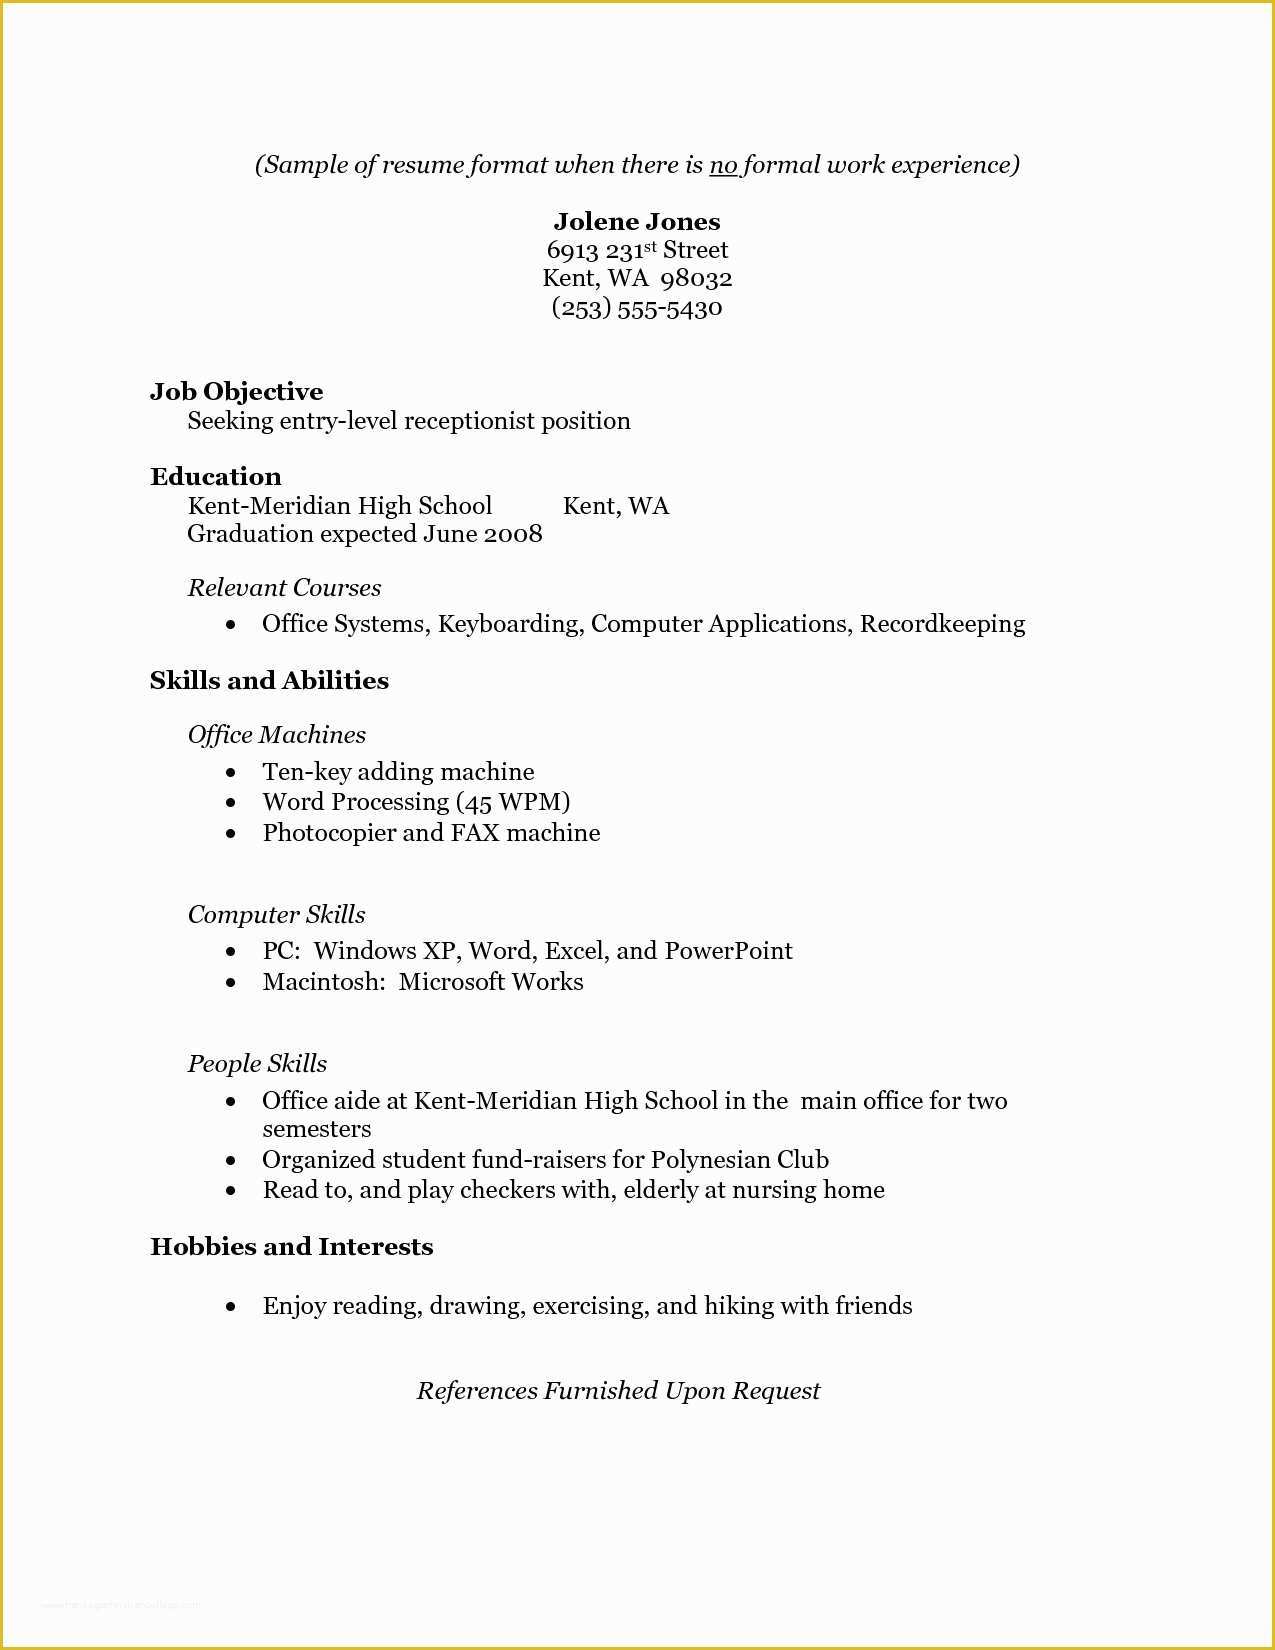 Free Resume Templates for No Work Experience Of No Work Experience Resume Template